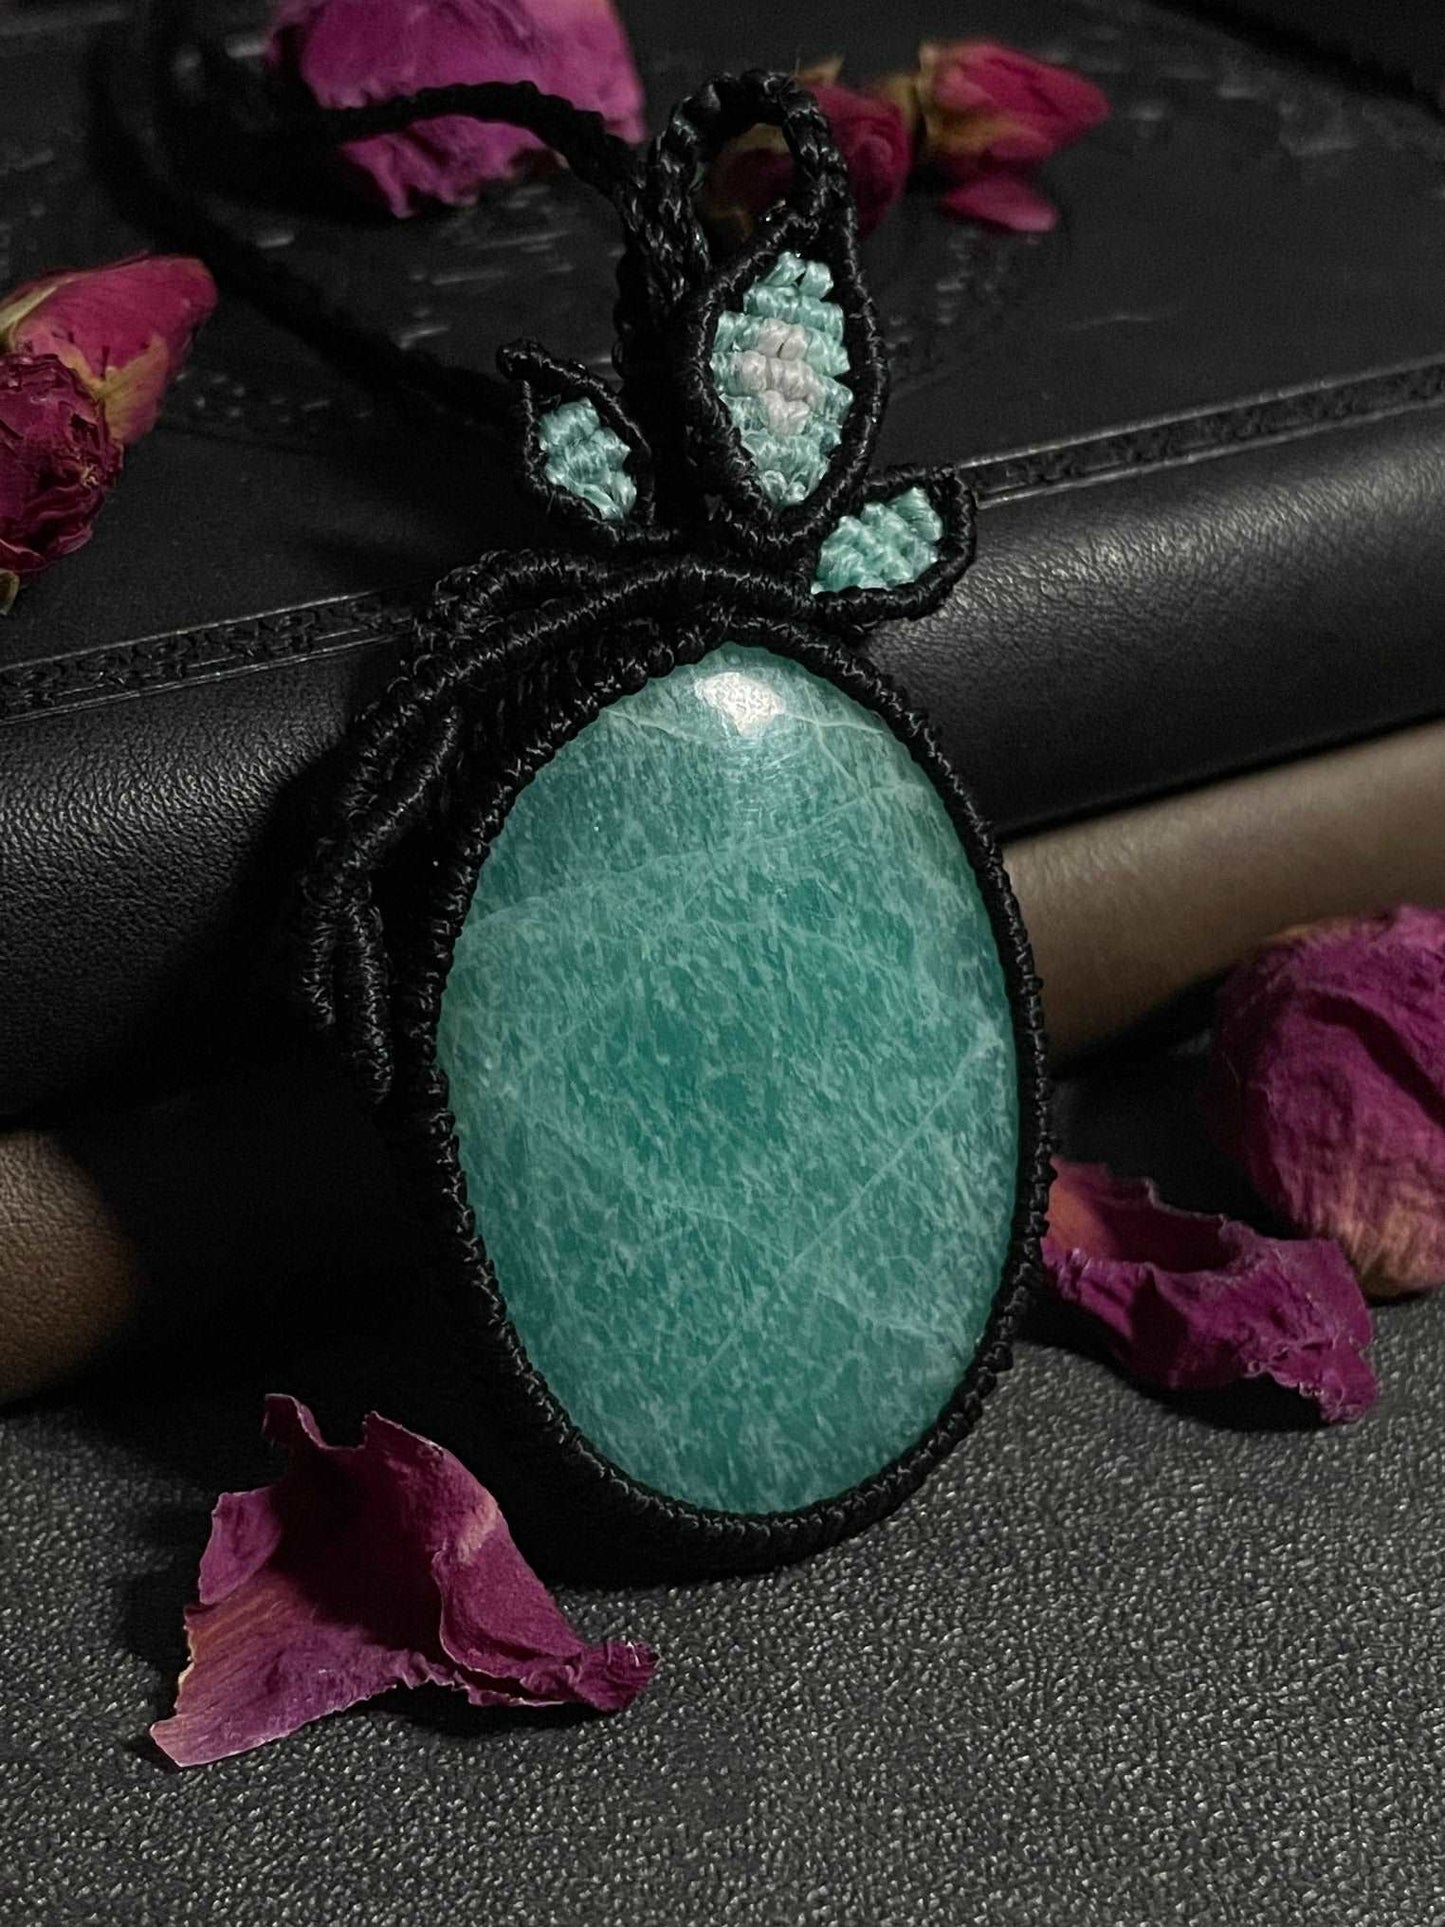 Pictured is an amazonite cabochon wrapped in macrame thread. A gothic book and flowers are nearby.